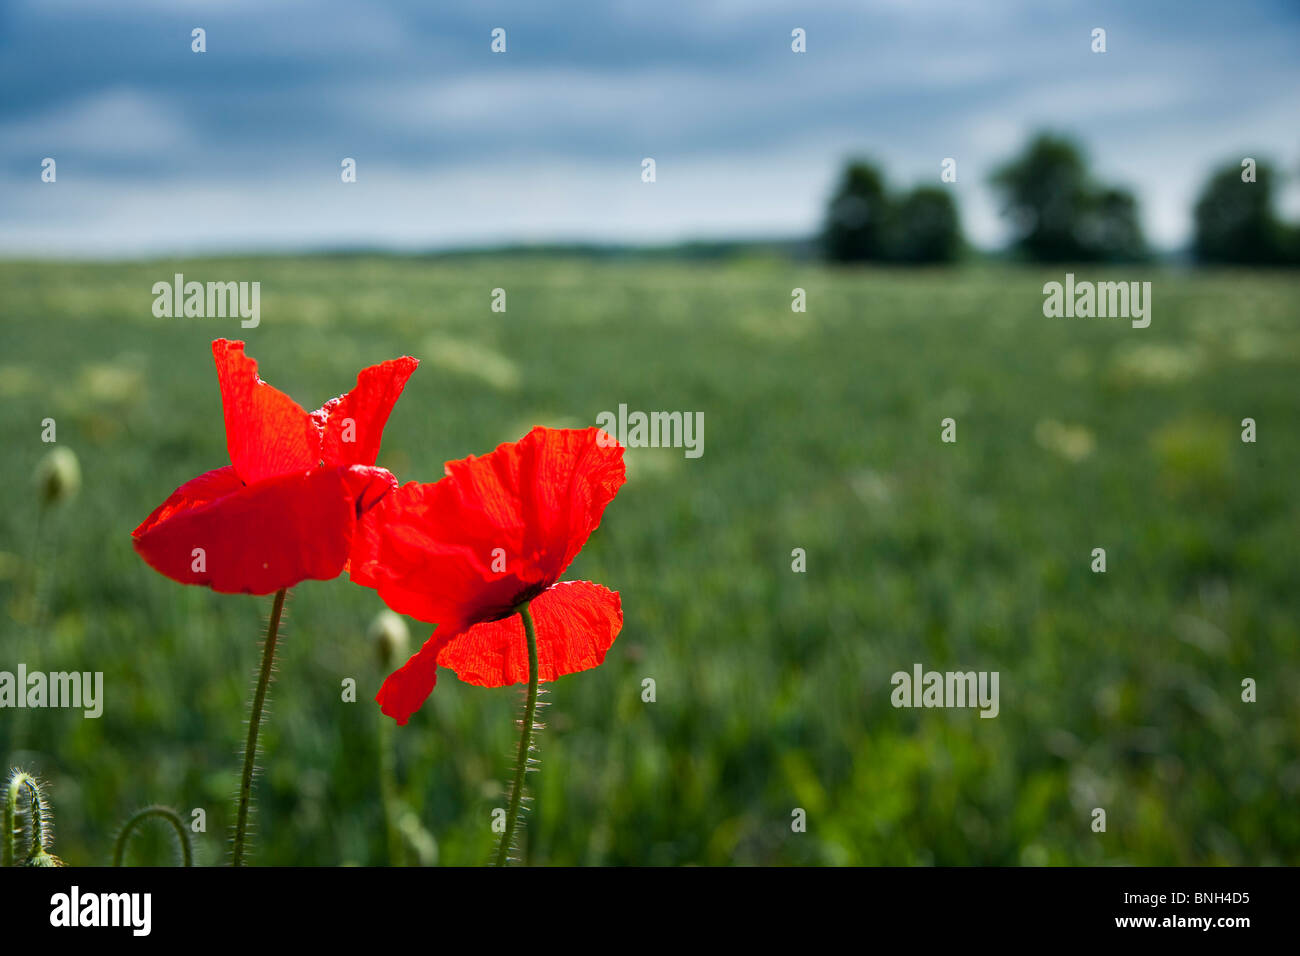 British Red poppies in field Banque D'Images